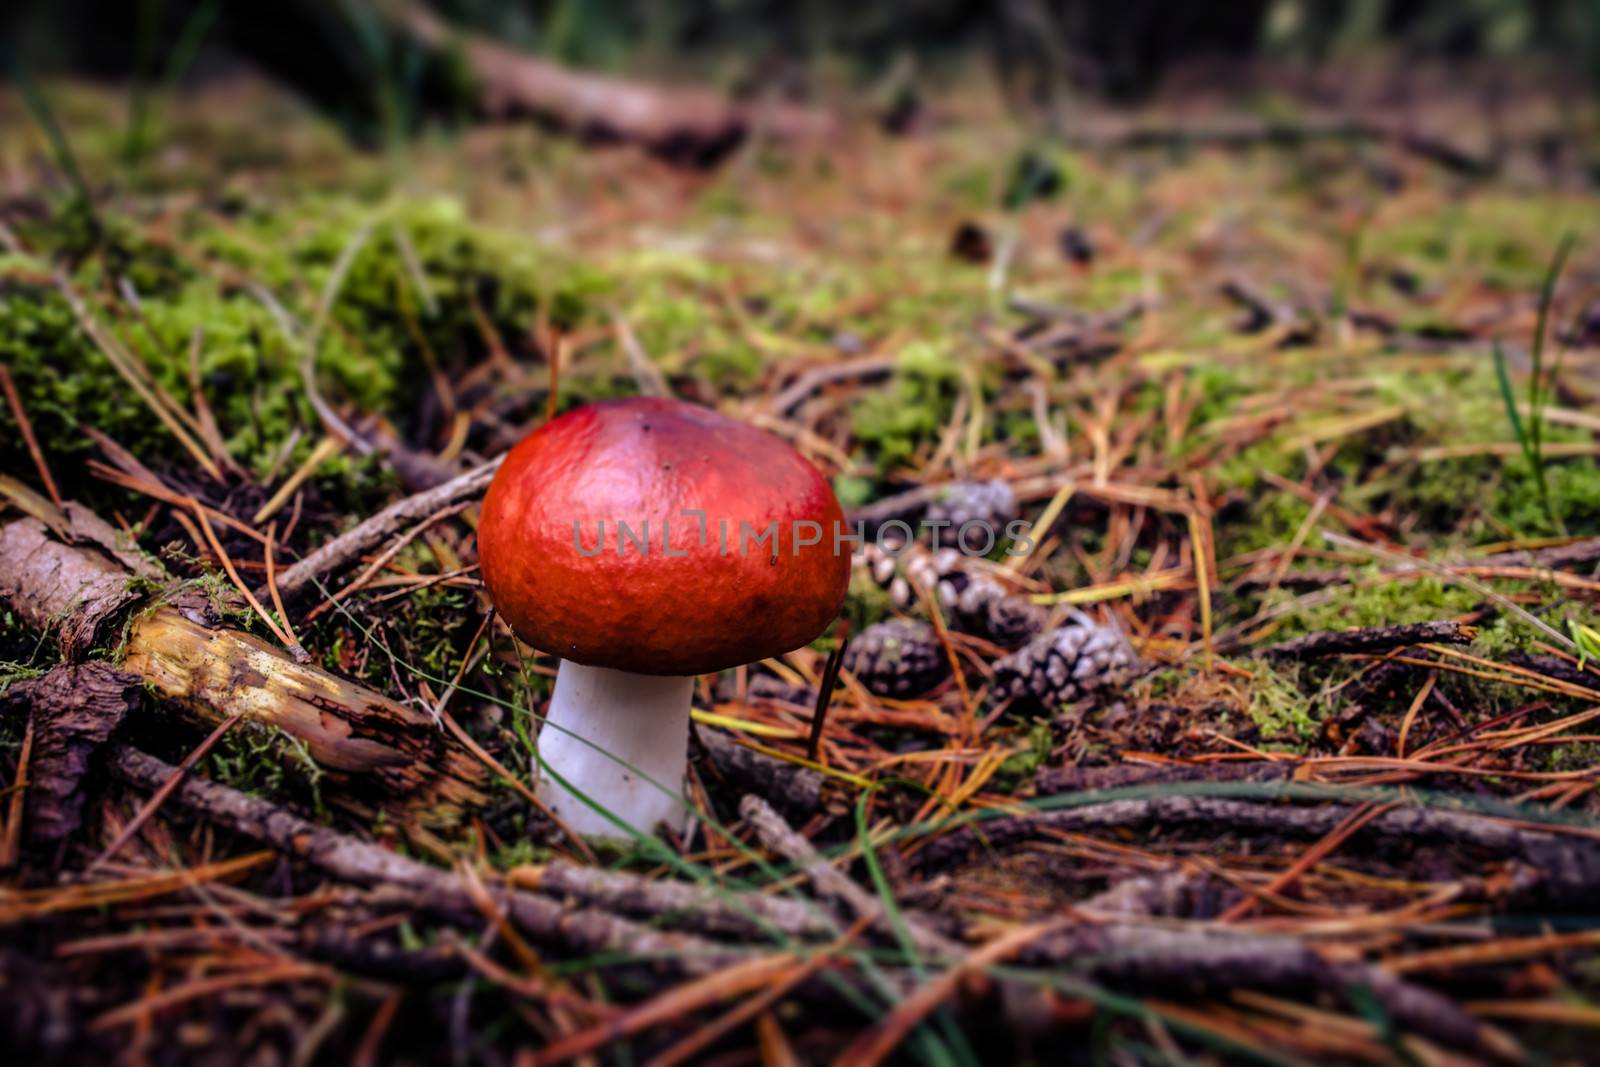 Red fungus by Sportactive